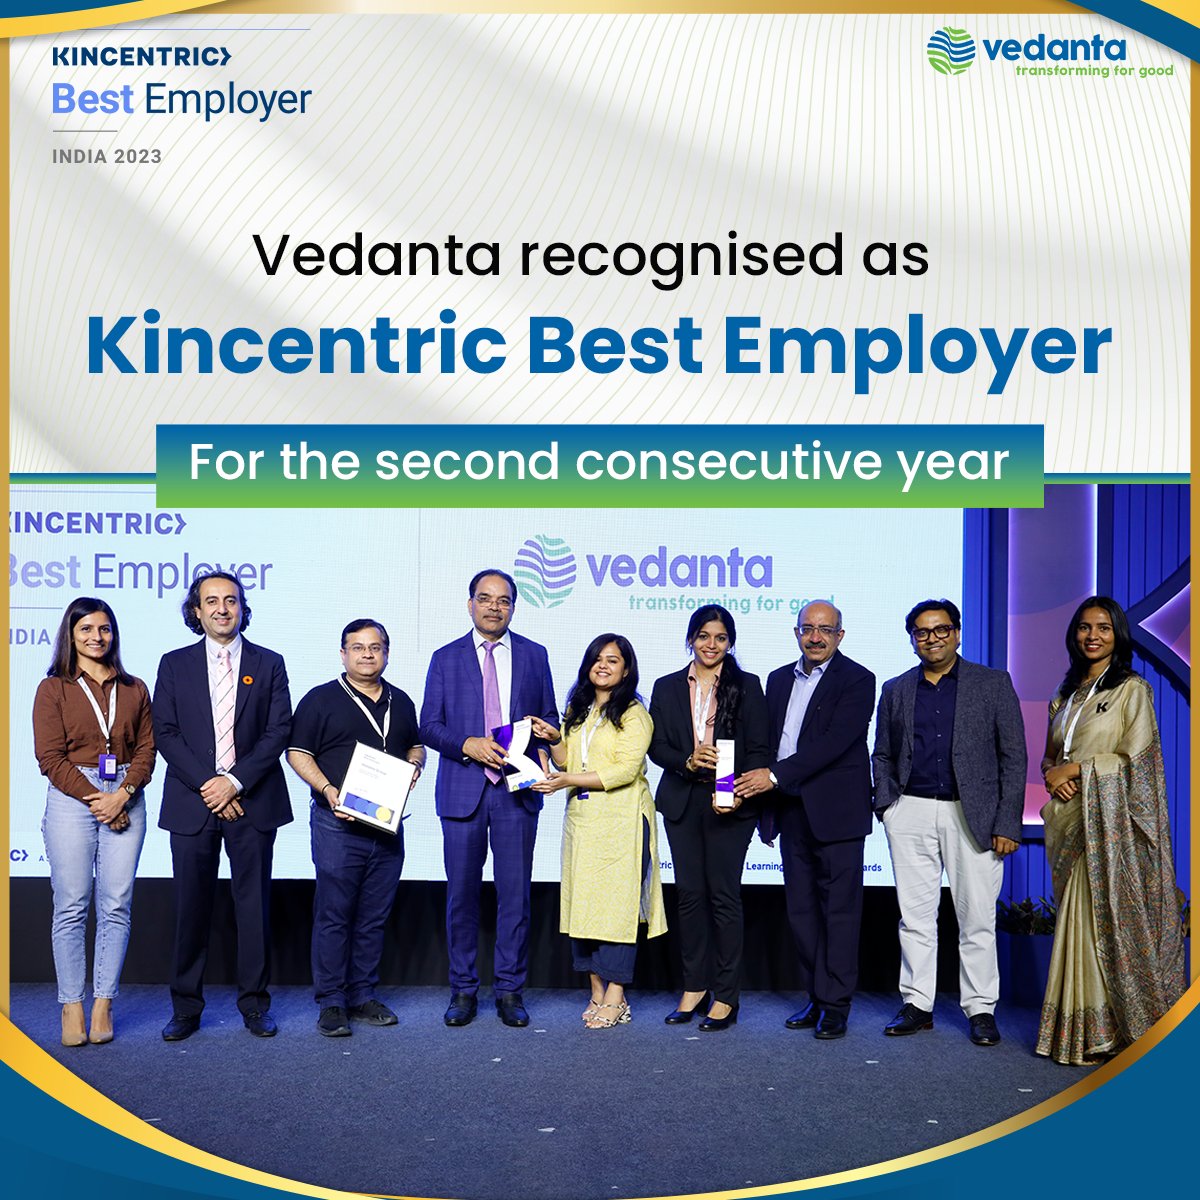 Coming together is a beginning, staying together is progress, and working together is success! Pleased to be recognised as the 'Kincentric Best Employer 2023' for the second year in a row and becoming a part of the 'Best Employer Club'. This recognition demonstrates #Vedanta's